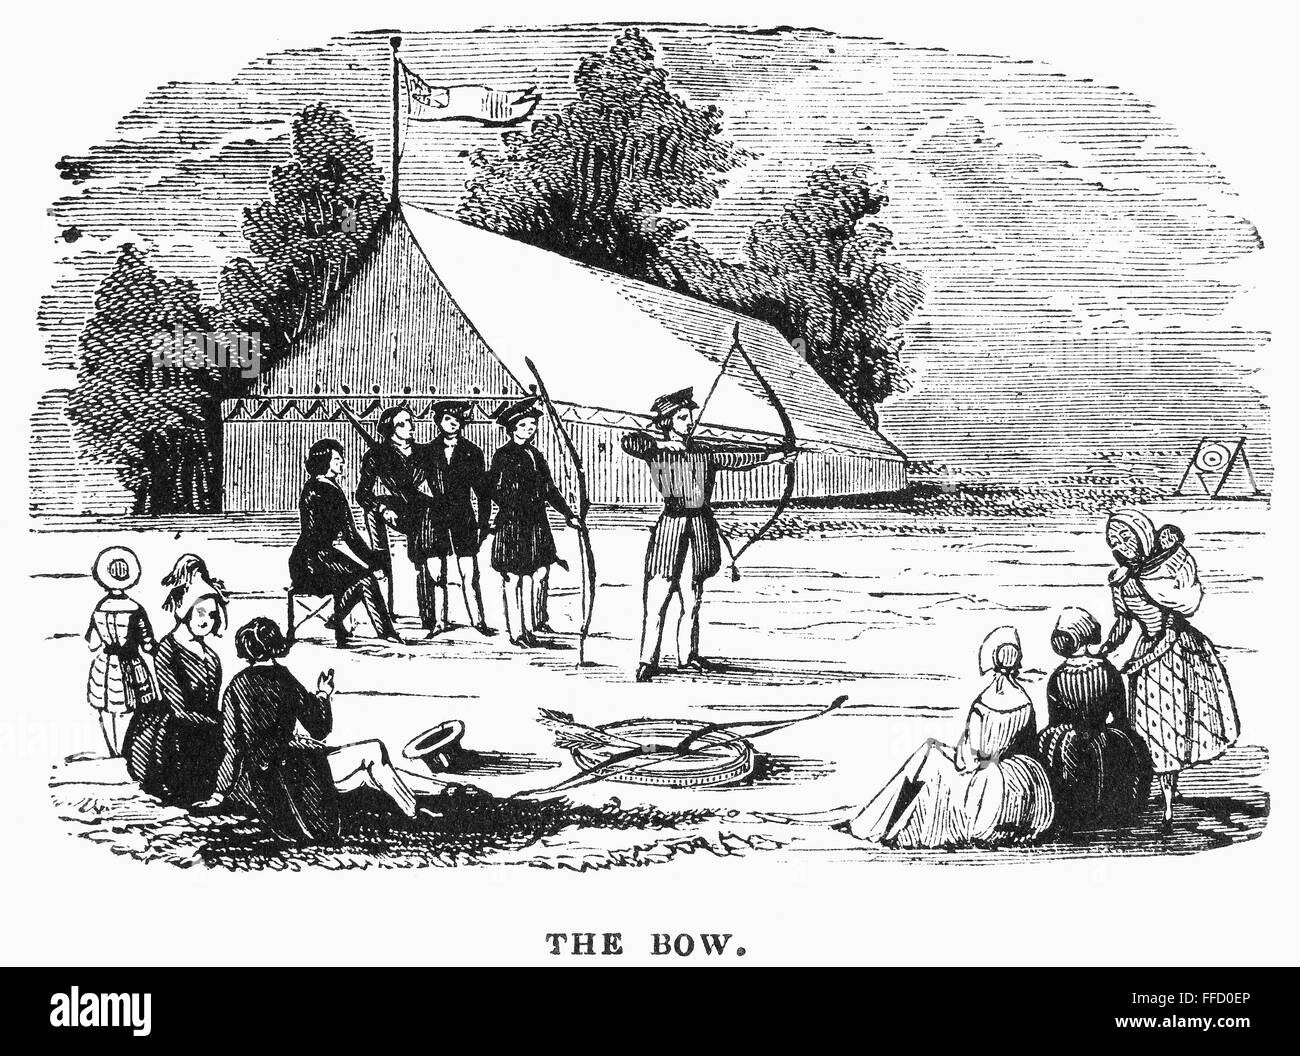 ARCHERY, c1830. /nArchery demonstration at an American military camp on the western frontier. Wood engraving, c1830. Stock Photo